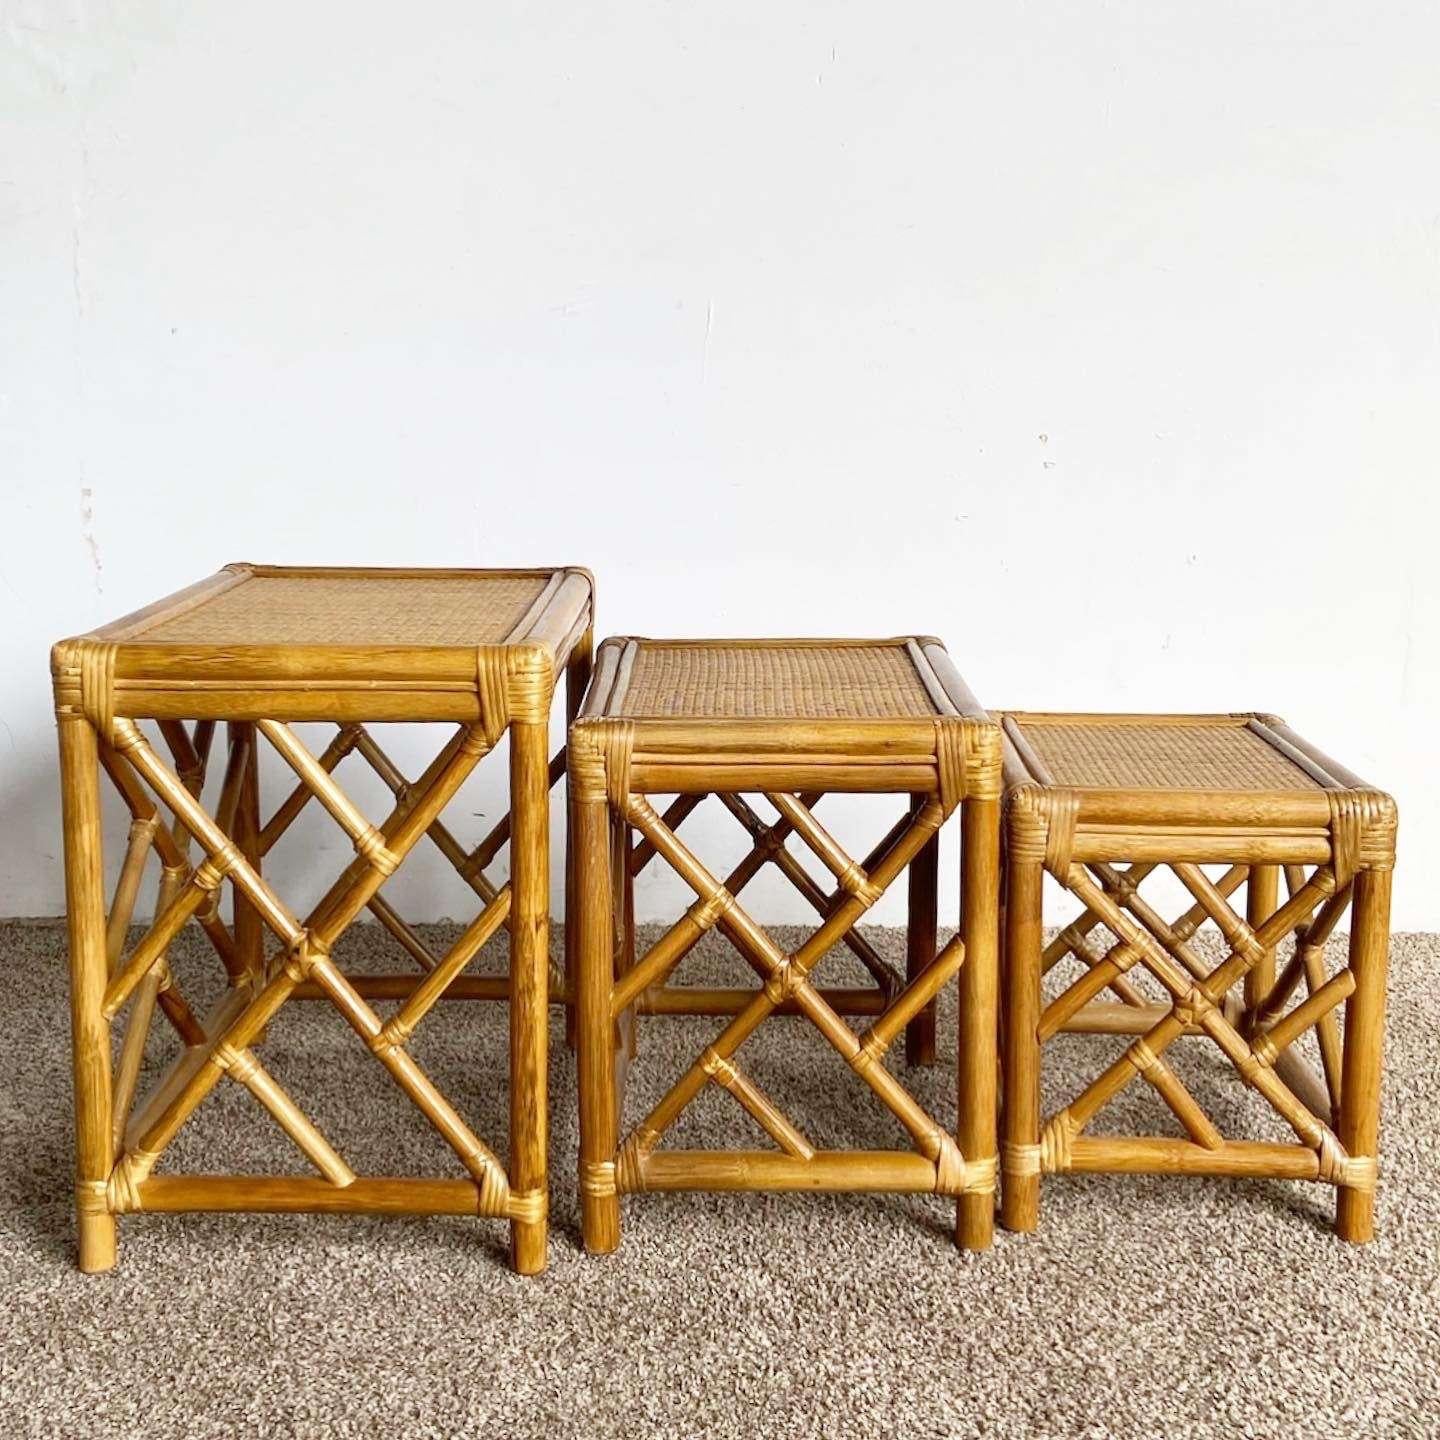 Late 20th Century Boho Chic Chippendale Bamboo Rattan and Wicker Nesting Tables - Set of 3 For Sale